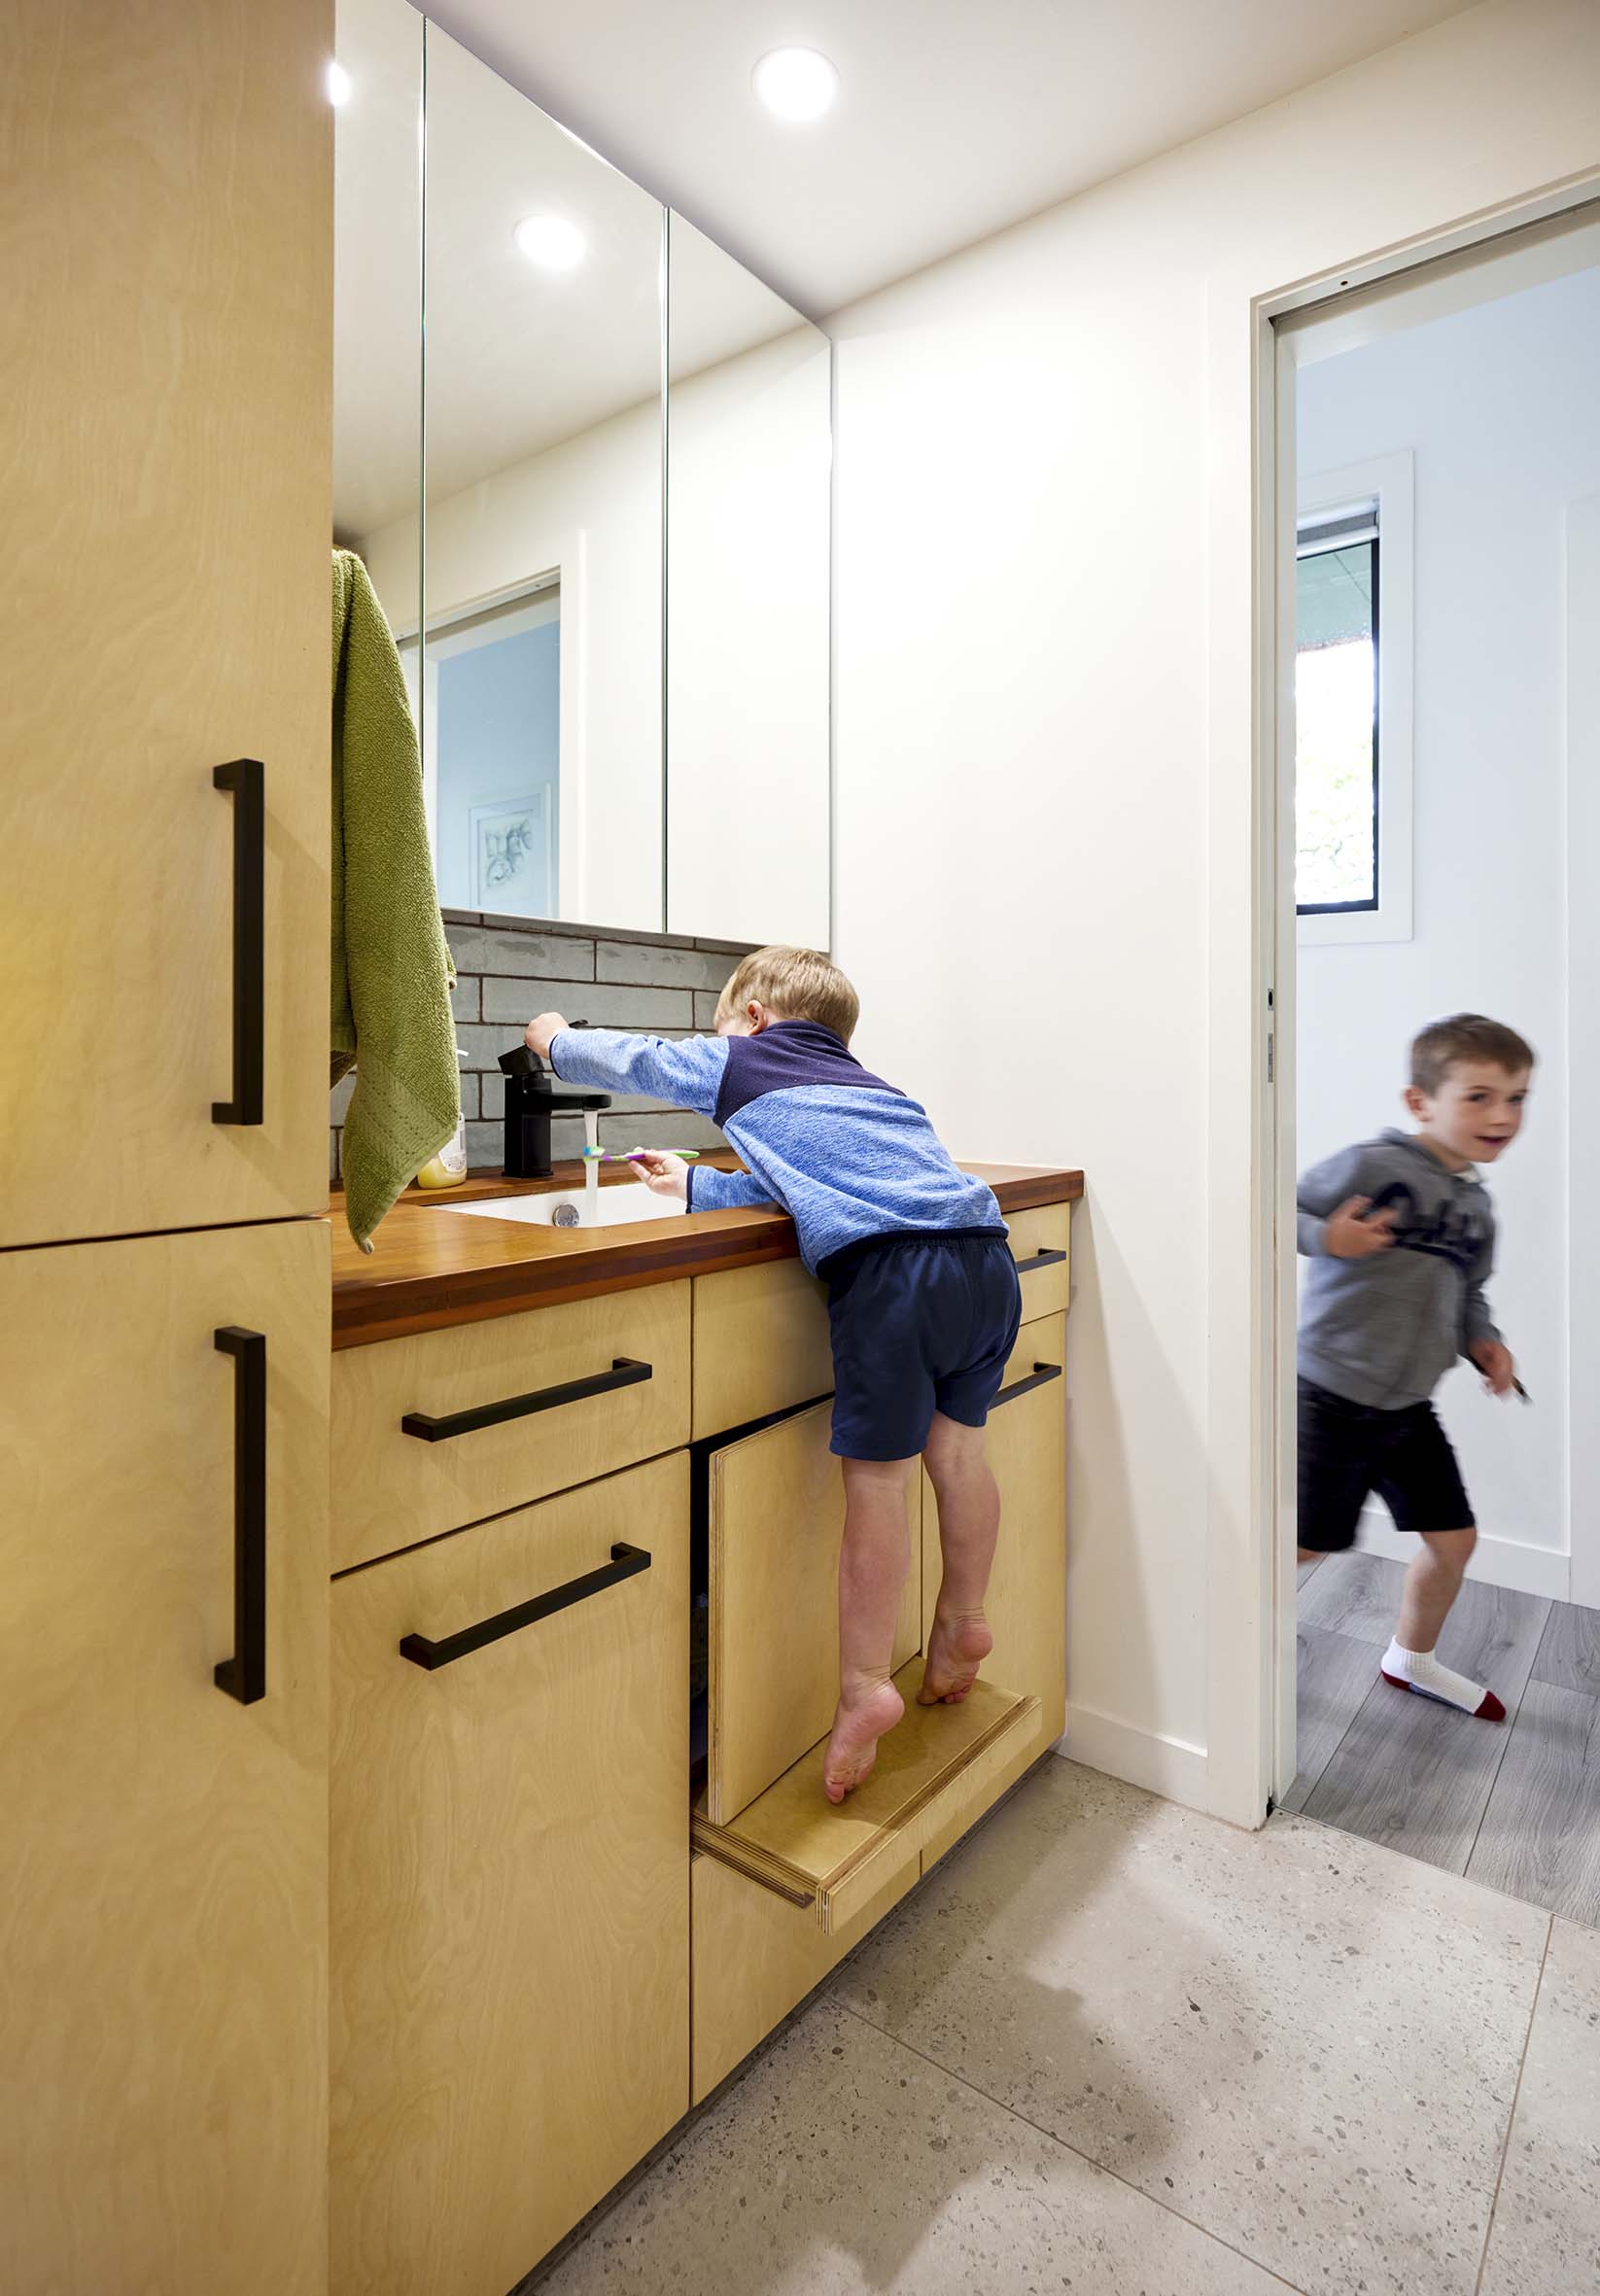 Two young boys in a bathroom, with one of them leaning to turn on sink while standing on a in-build stand